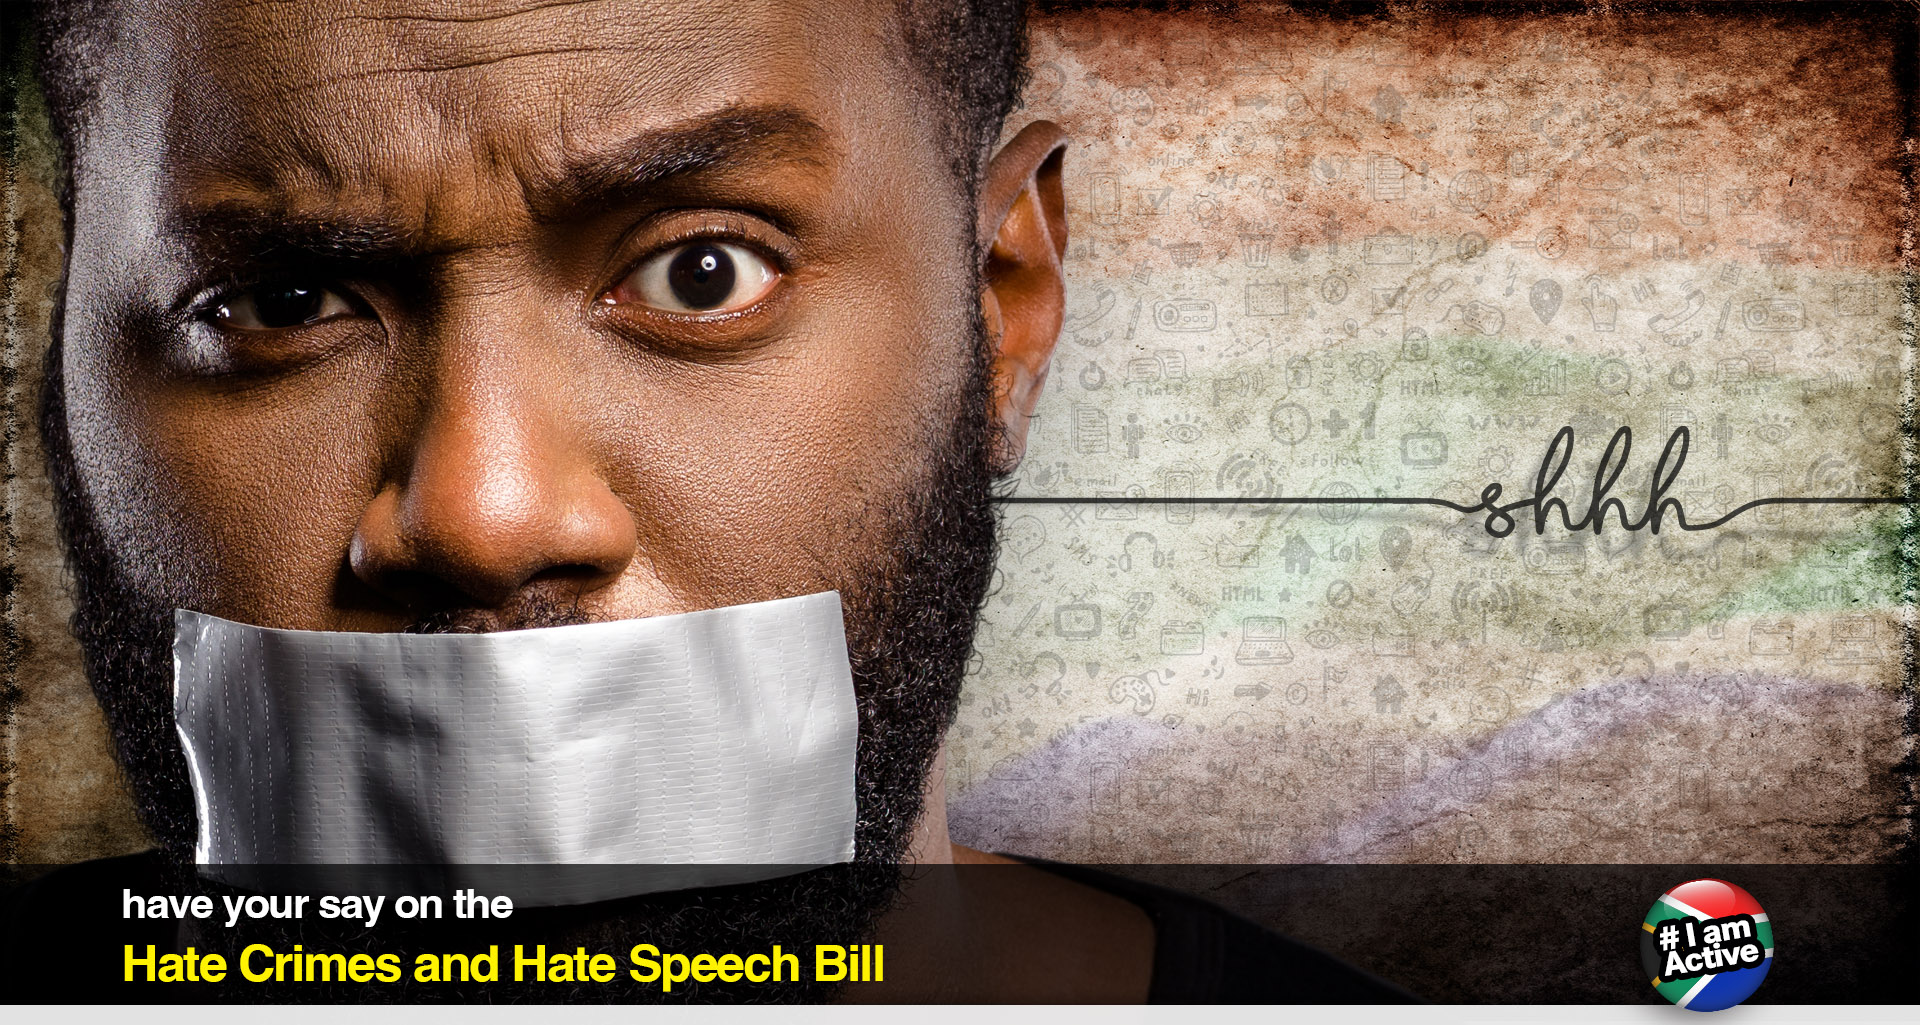 Have your say on the Hate Speech and Hate Crimes Bill